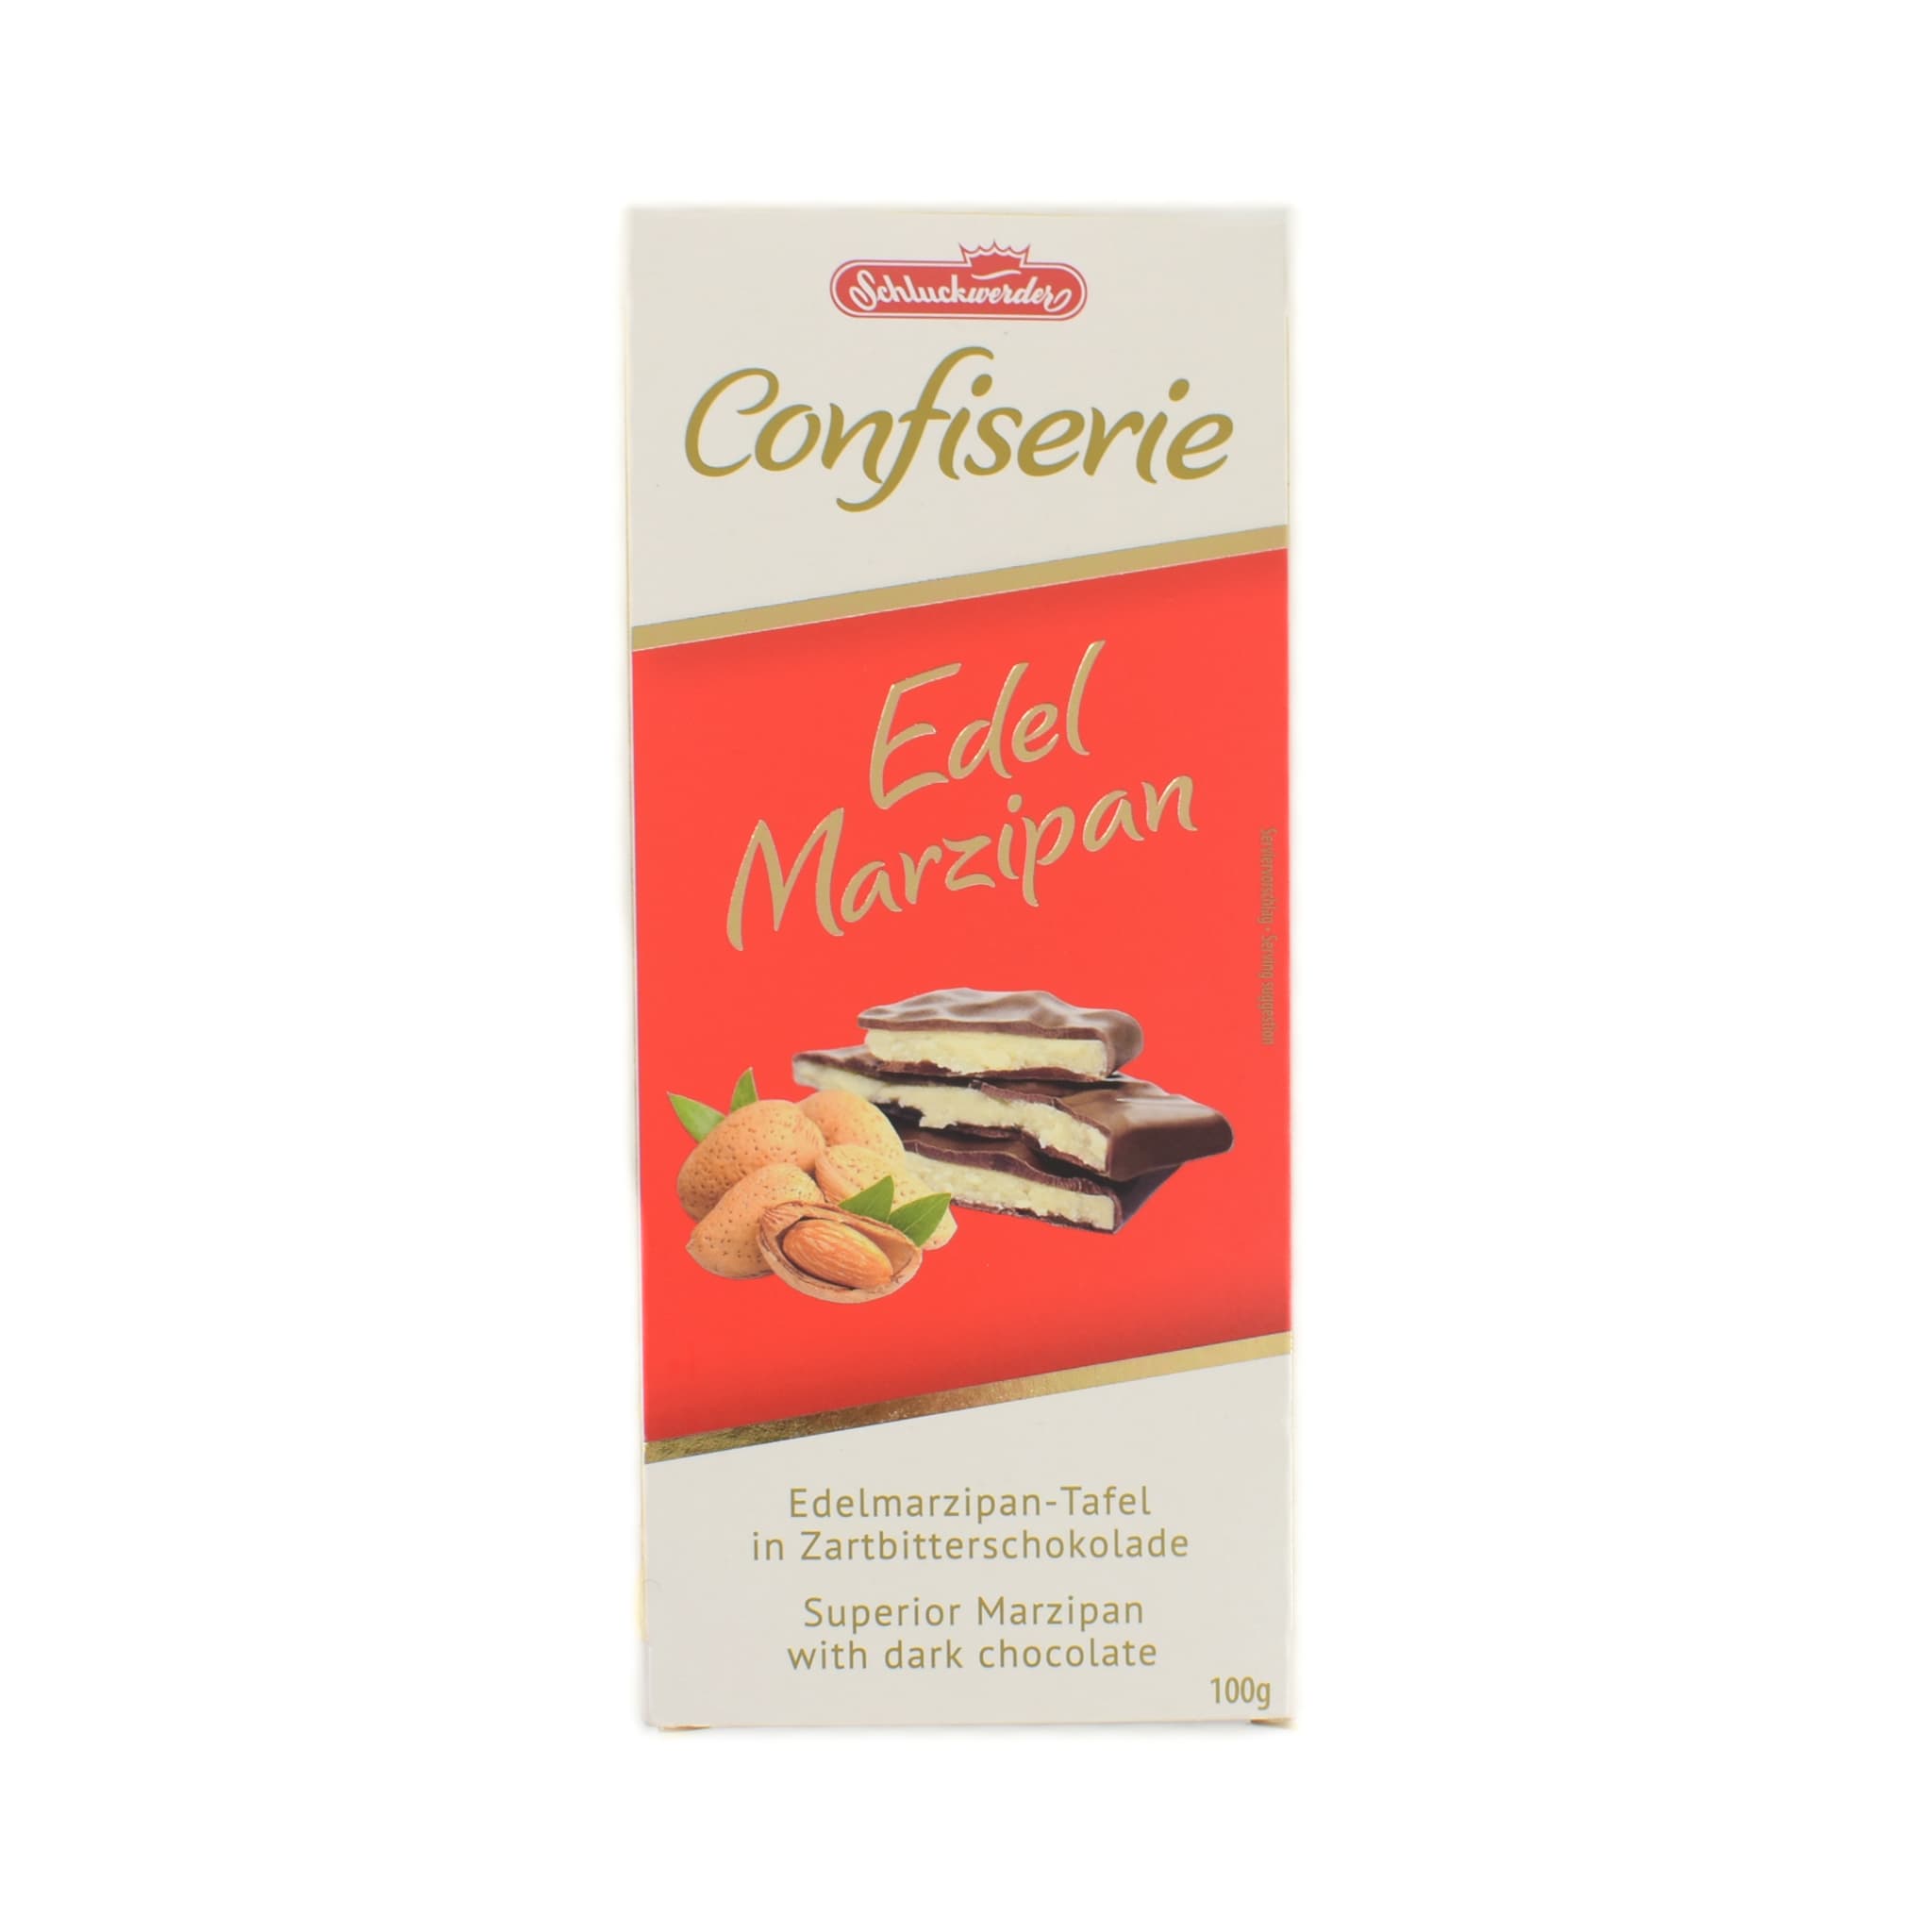 Schluckwerder Edel Marzipan with Dark Chocolate 100g Ingredients Chocolate Bars & Confectionery